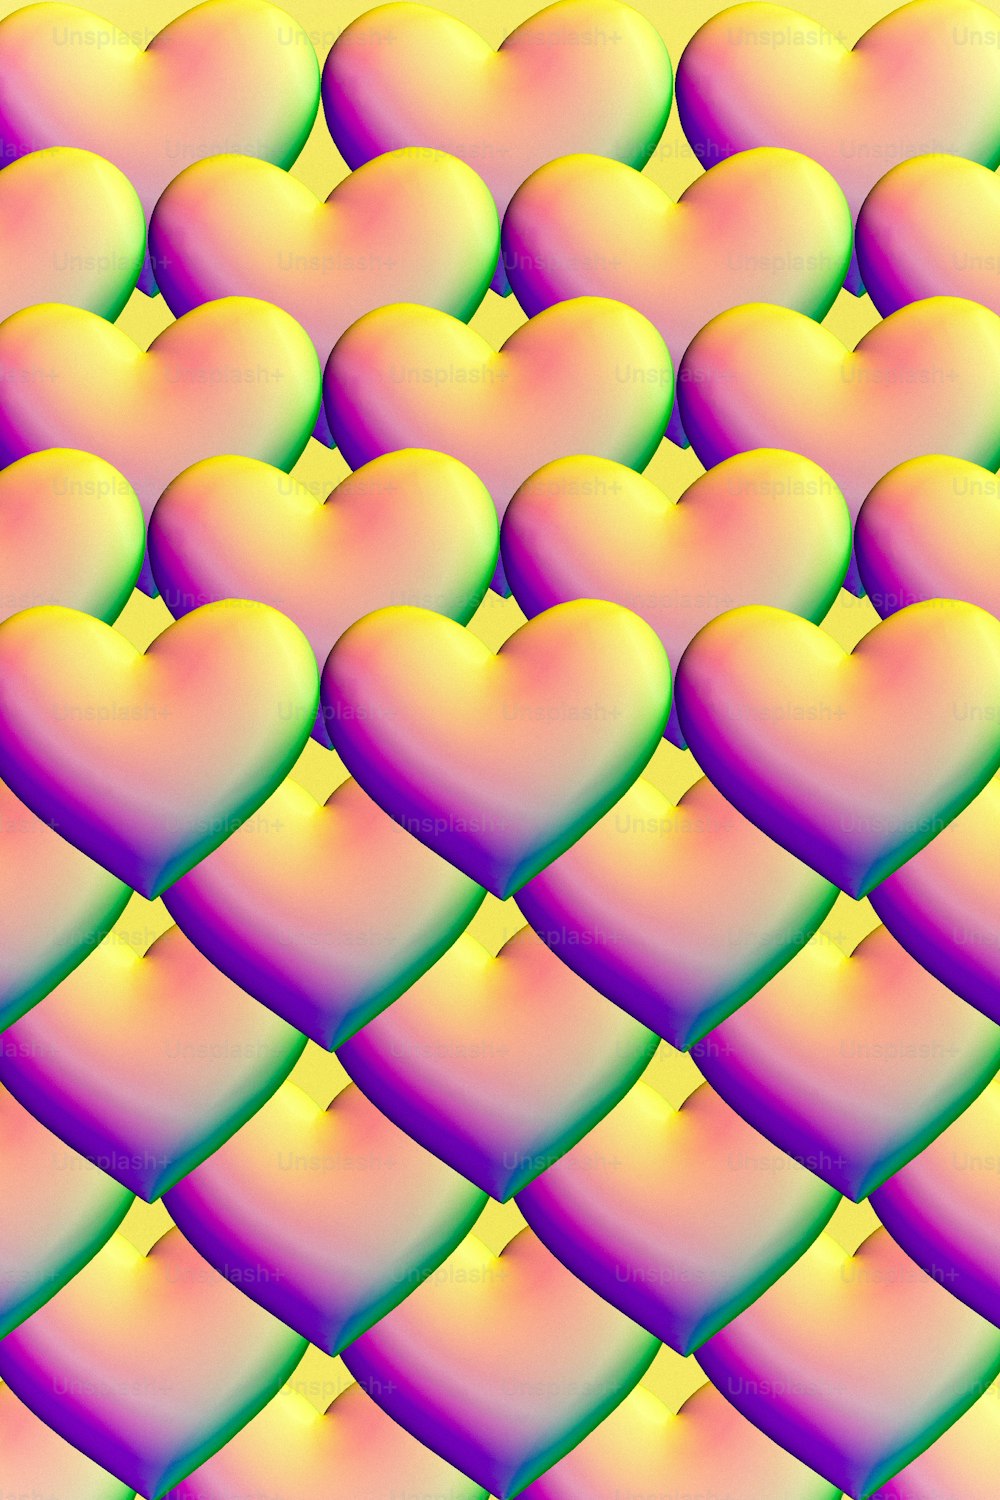 a large group of heart shaped objects on a yellow background